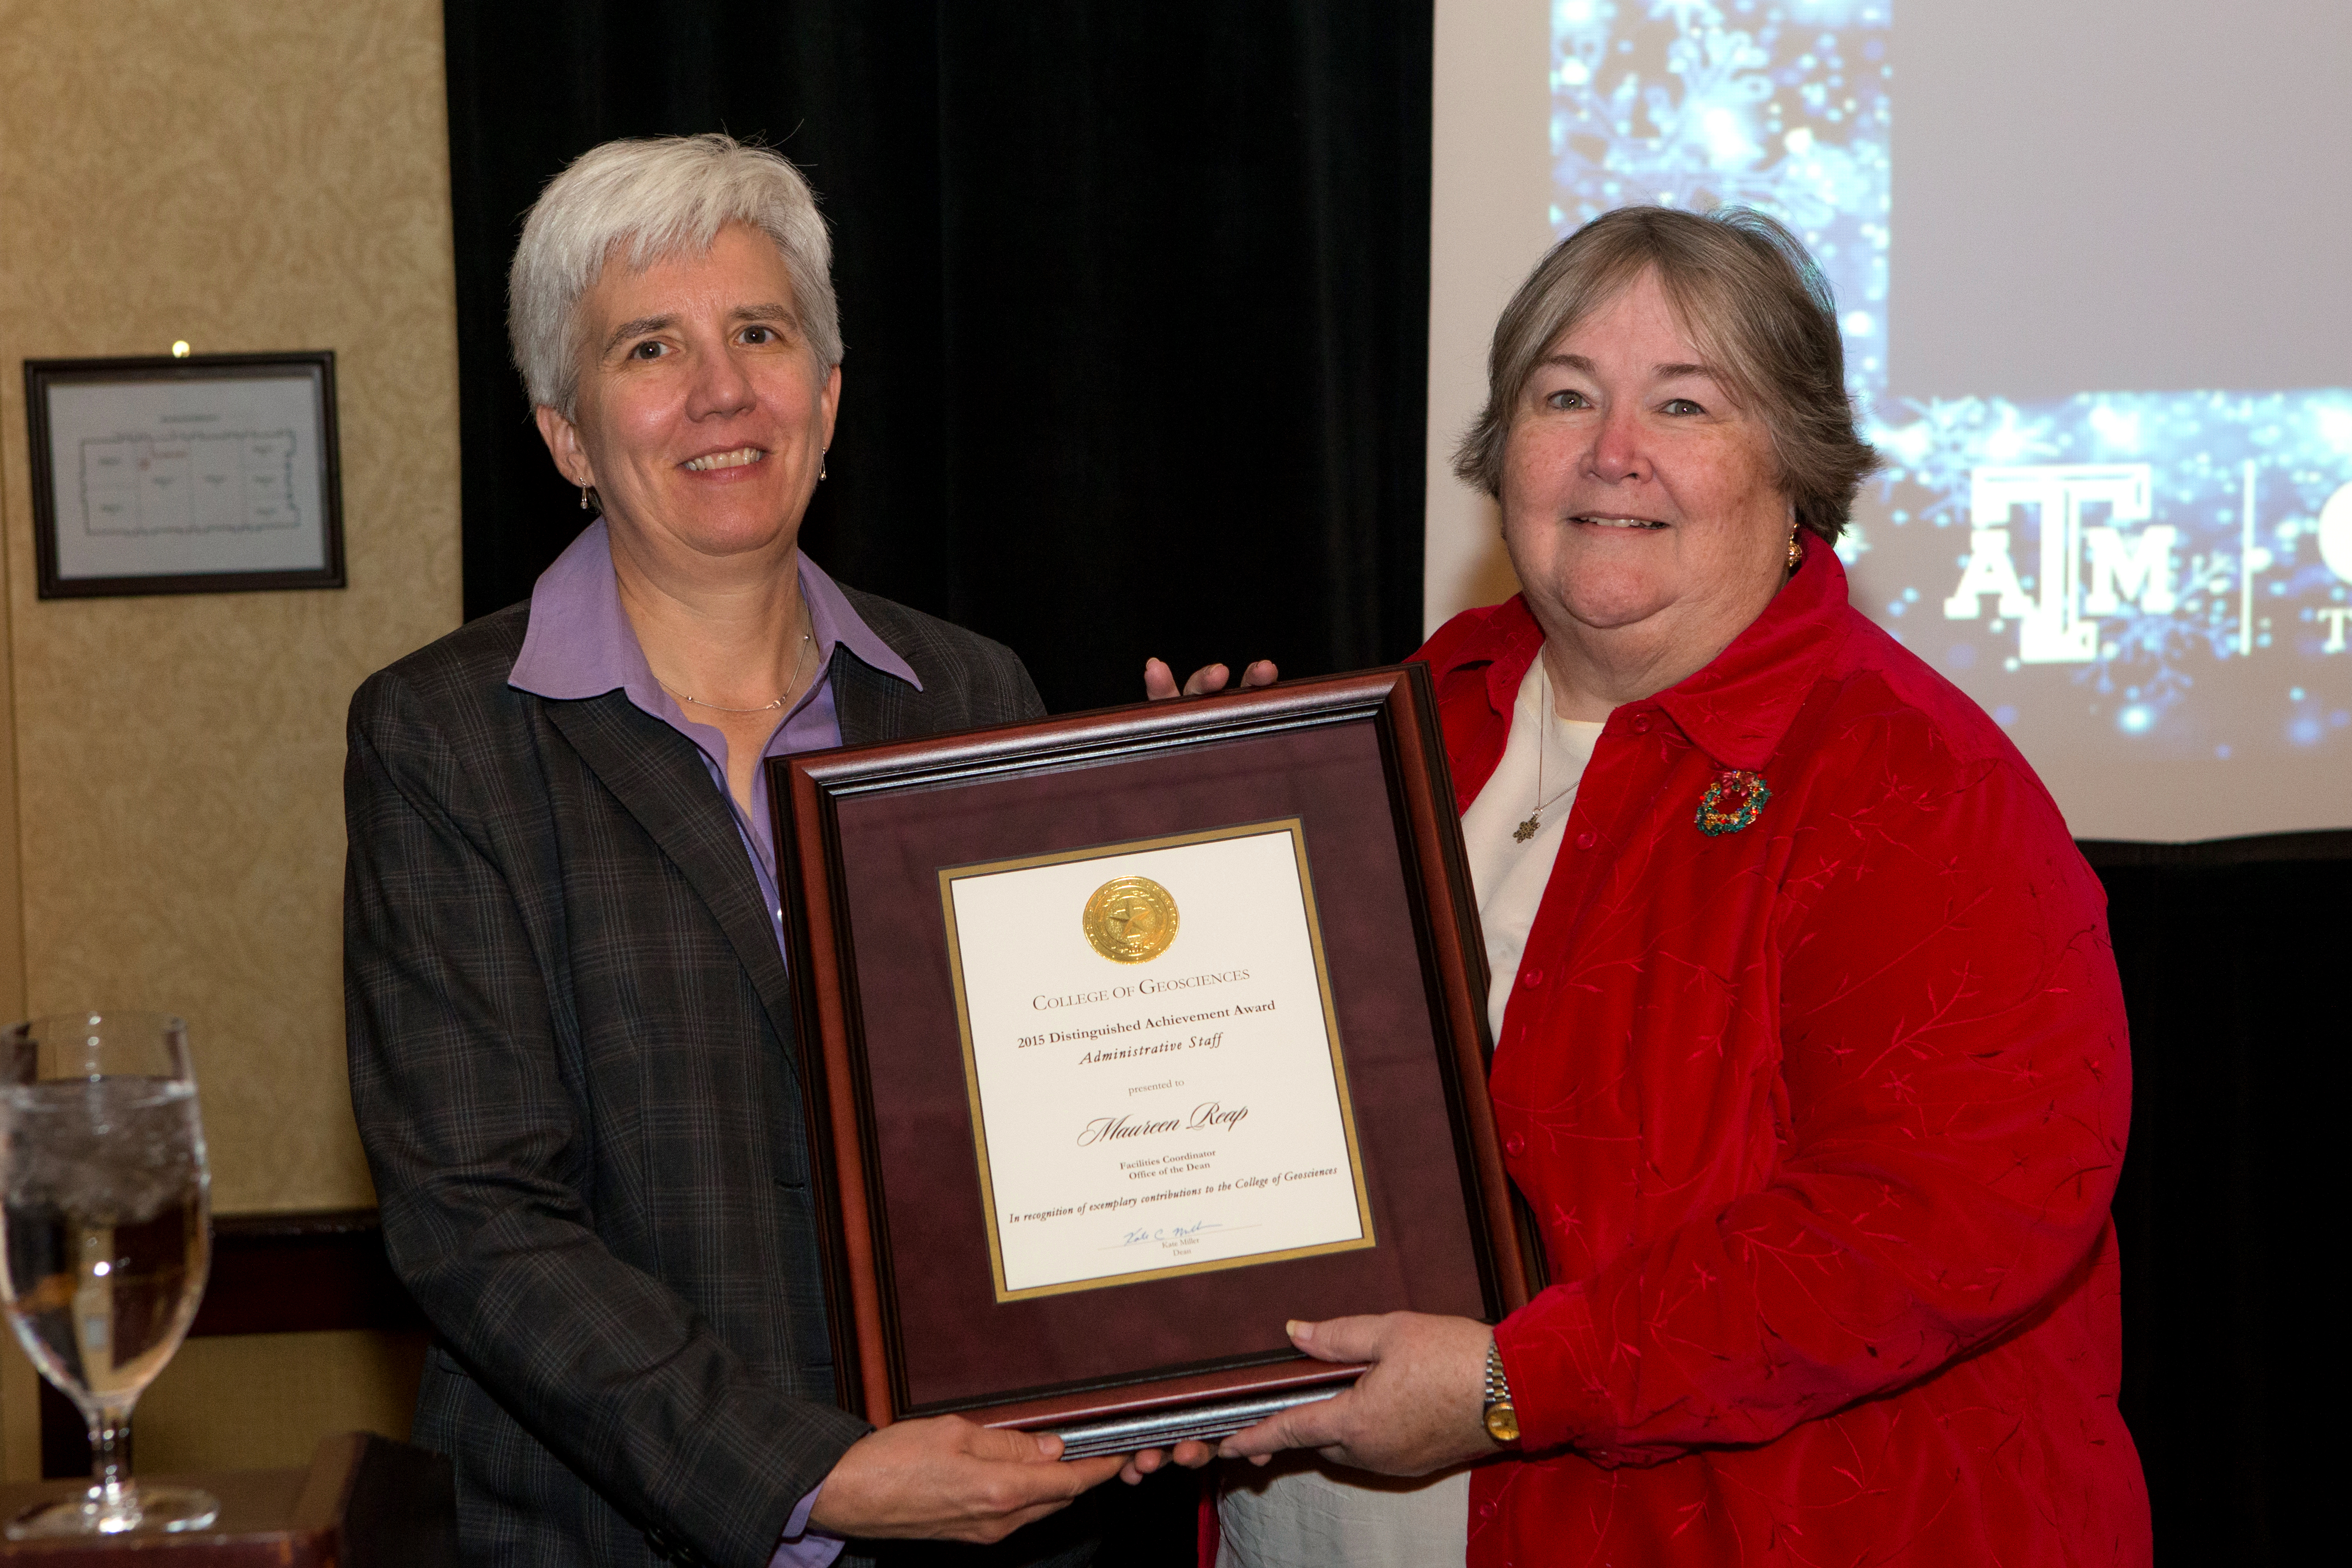 Facilities Director, Maureen Reap, retires from the College of Geosciences